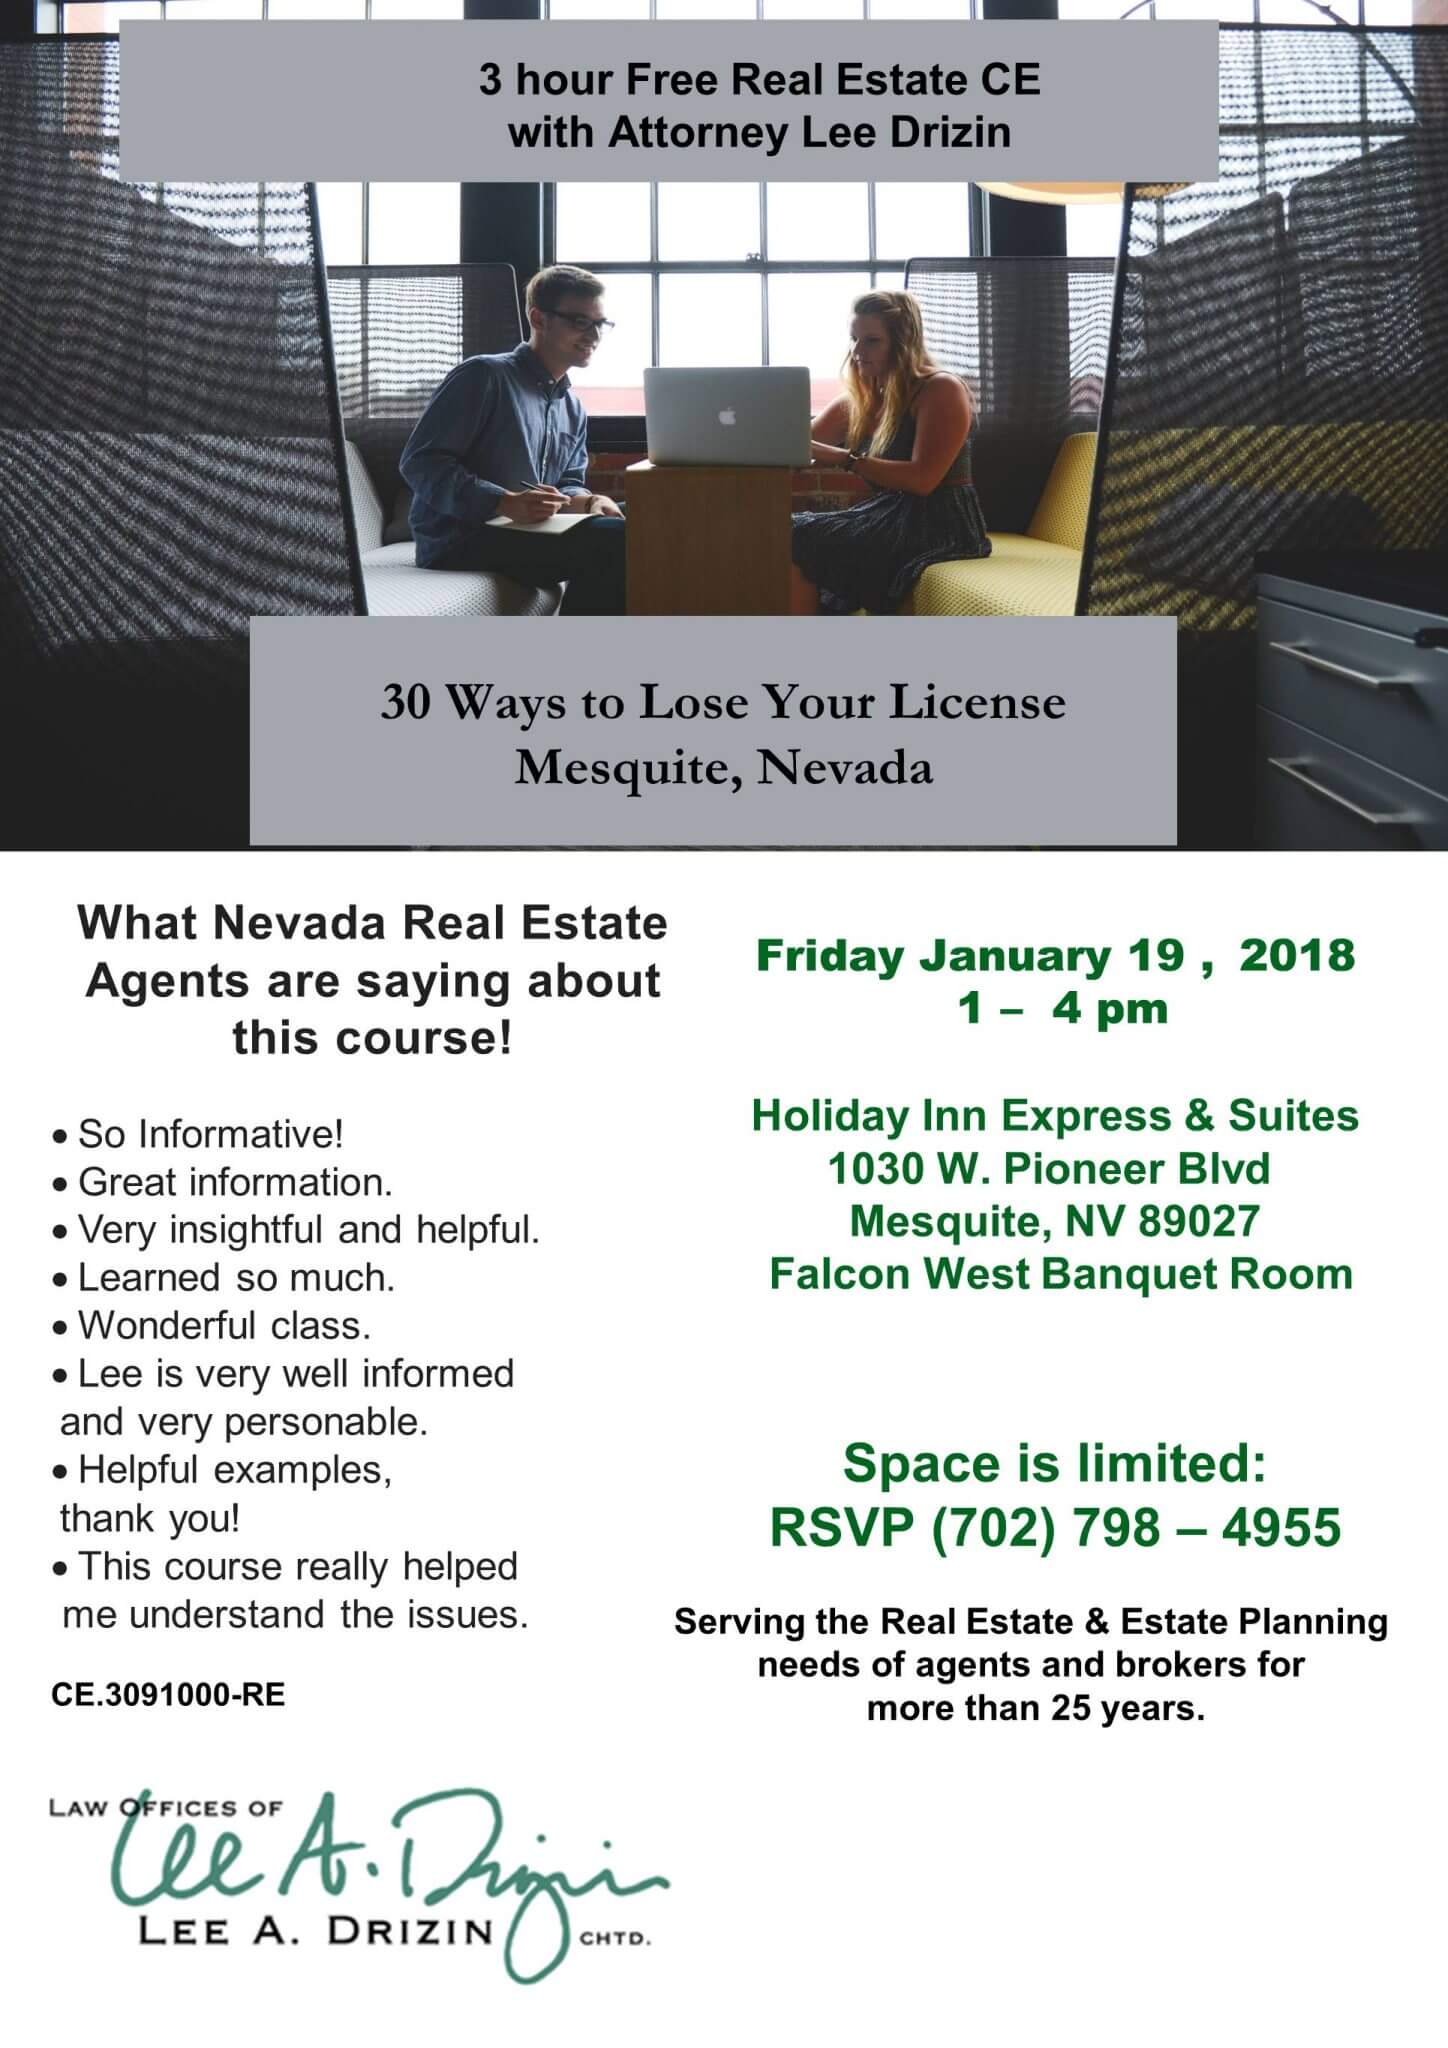 30 Ways to Lose Your License – Mesquite, NV – Free 3 hour CE taught by Attorney Lee A. Drizin